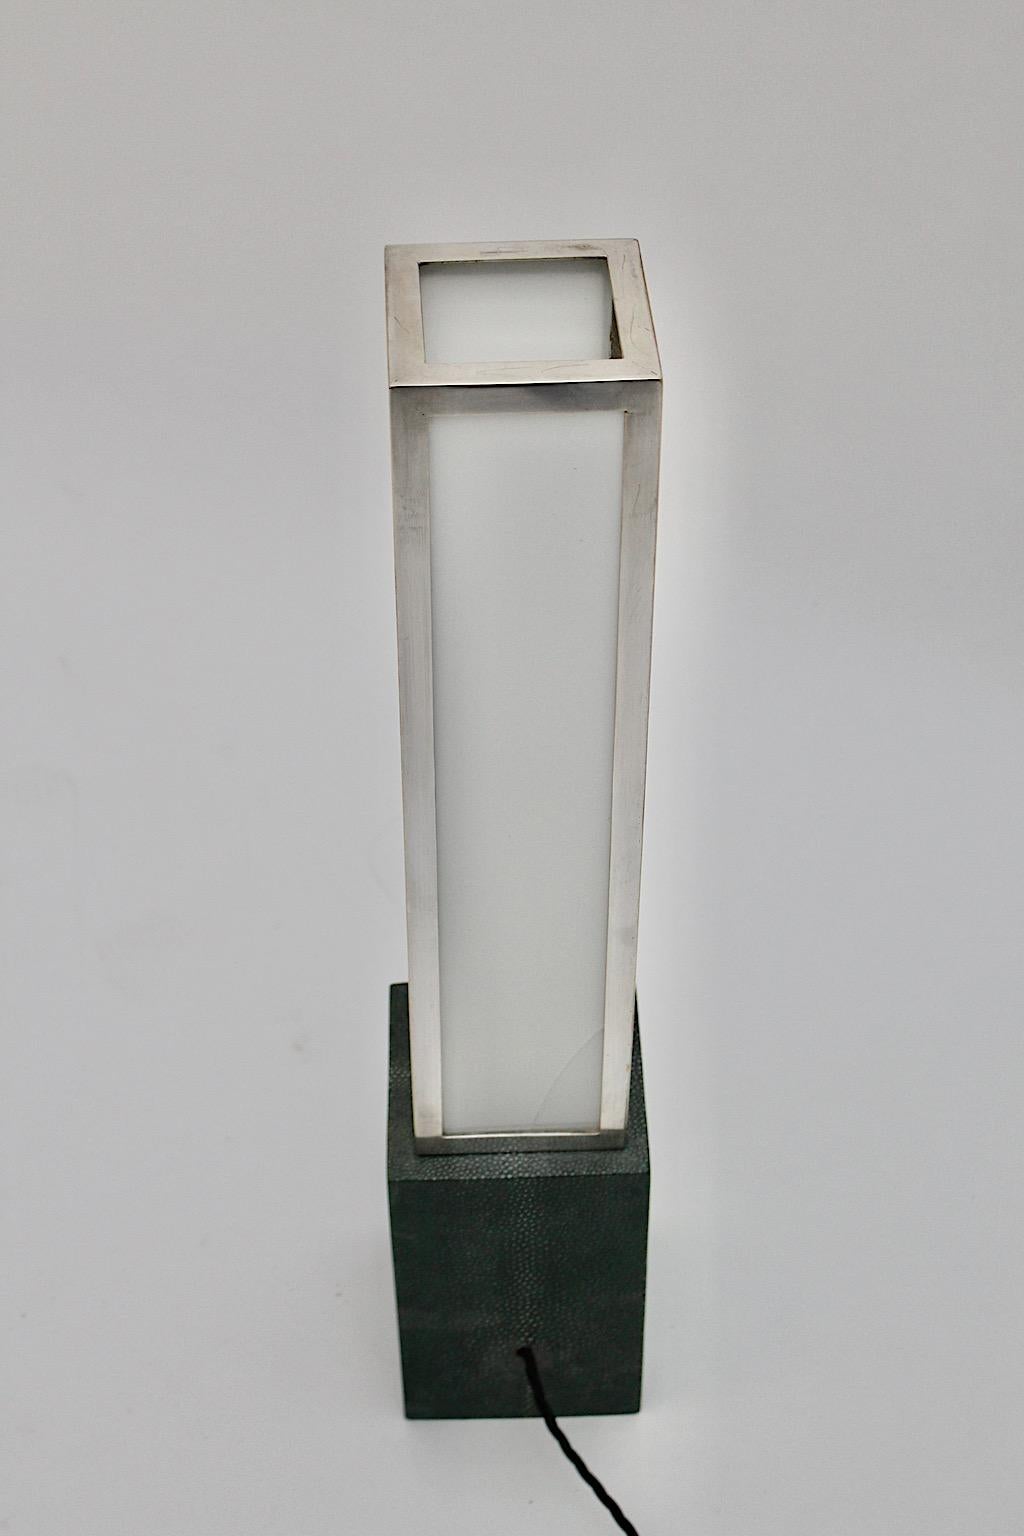 Art Deco vintage table lamp geometric like from plexiglass, nickel plated brass and leather in the style of Eckart Muthesius 1920s Germany.
A wonderful Art Deco table lamp with a rectangular base from green leather while the lamp shade shows